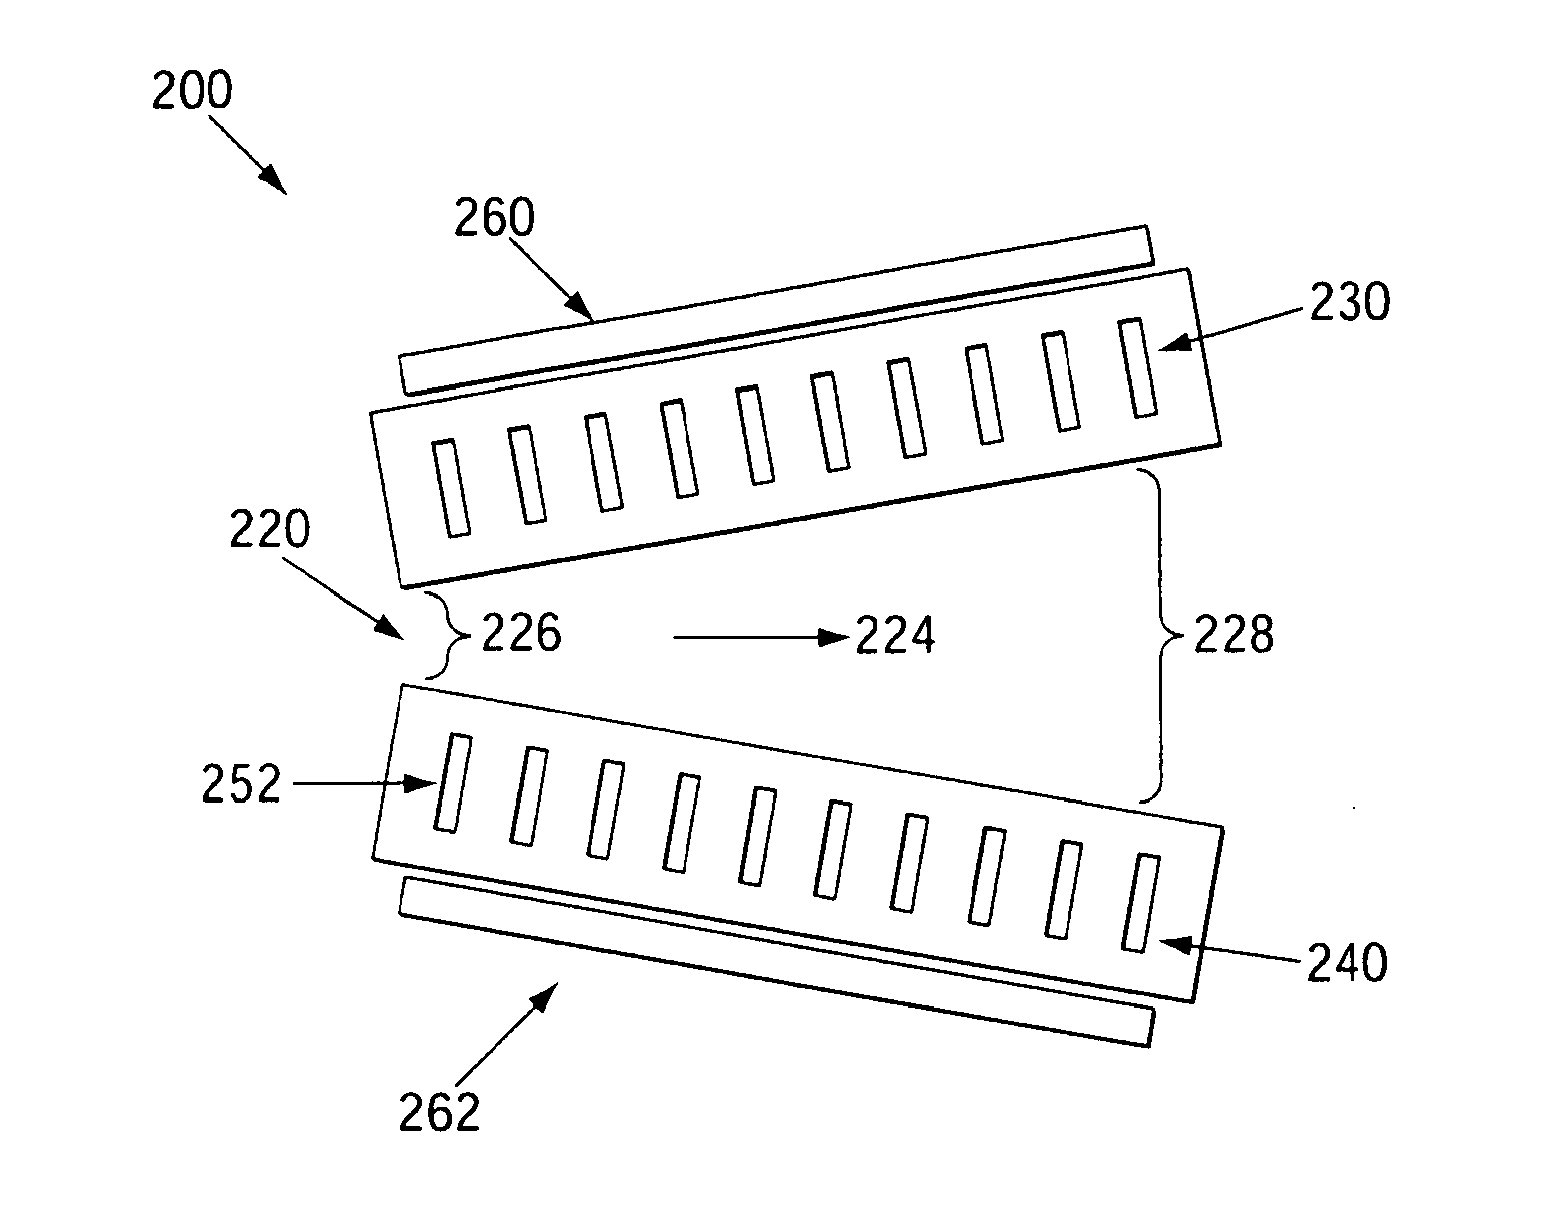 Isoelectric focusing systems and methods